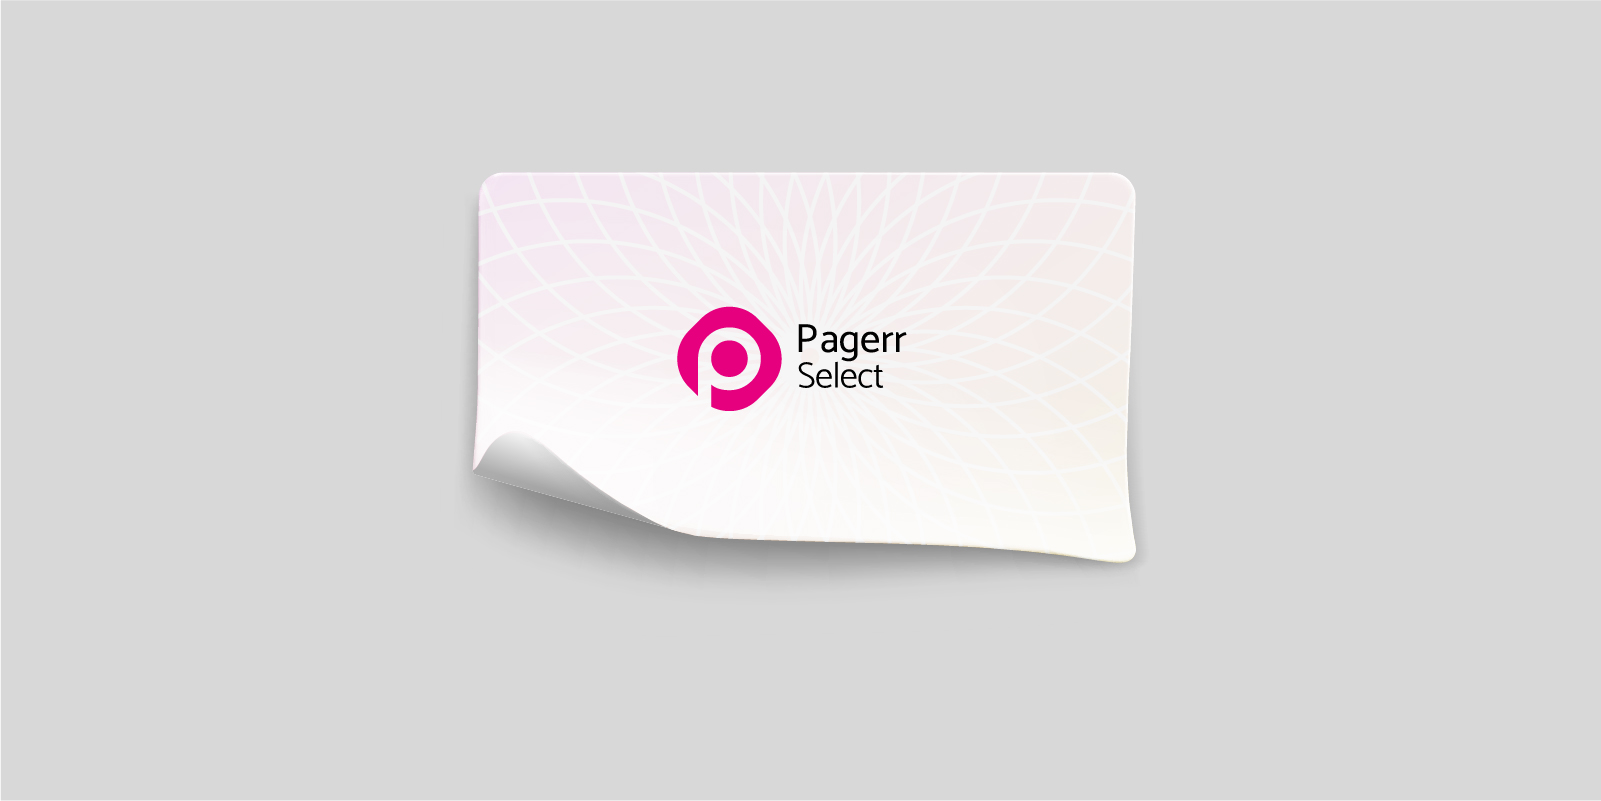 Sheet stickers in Townsville - Print with Pagerr